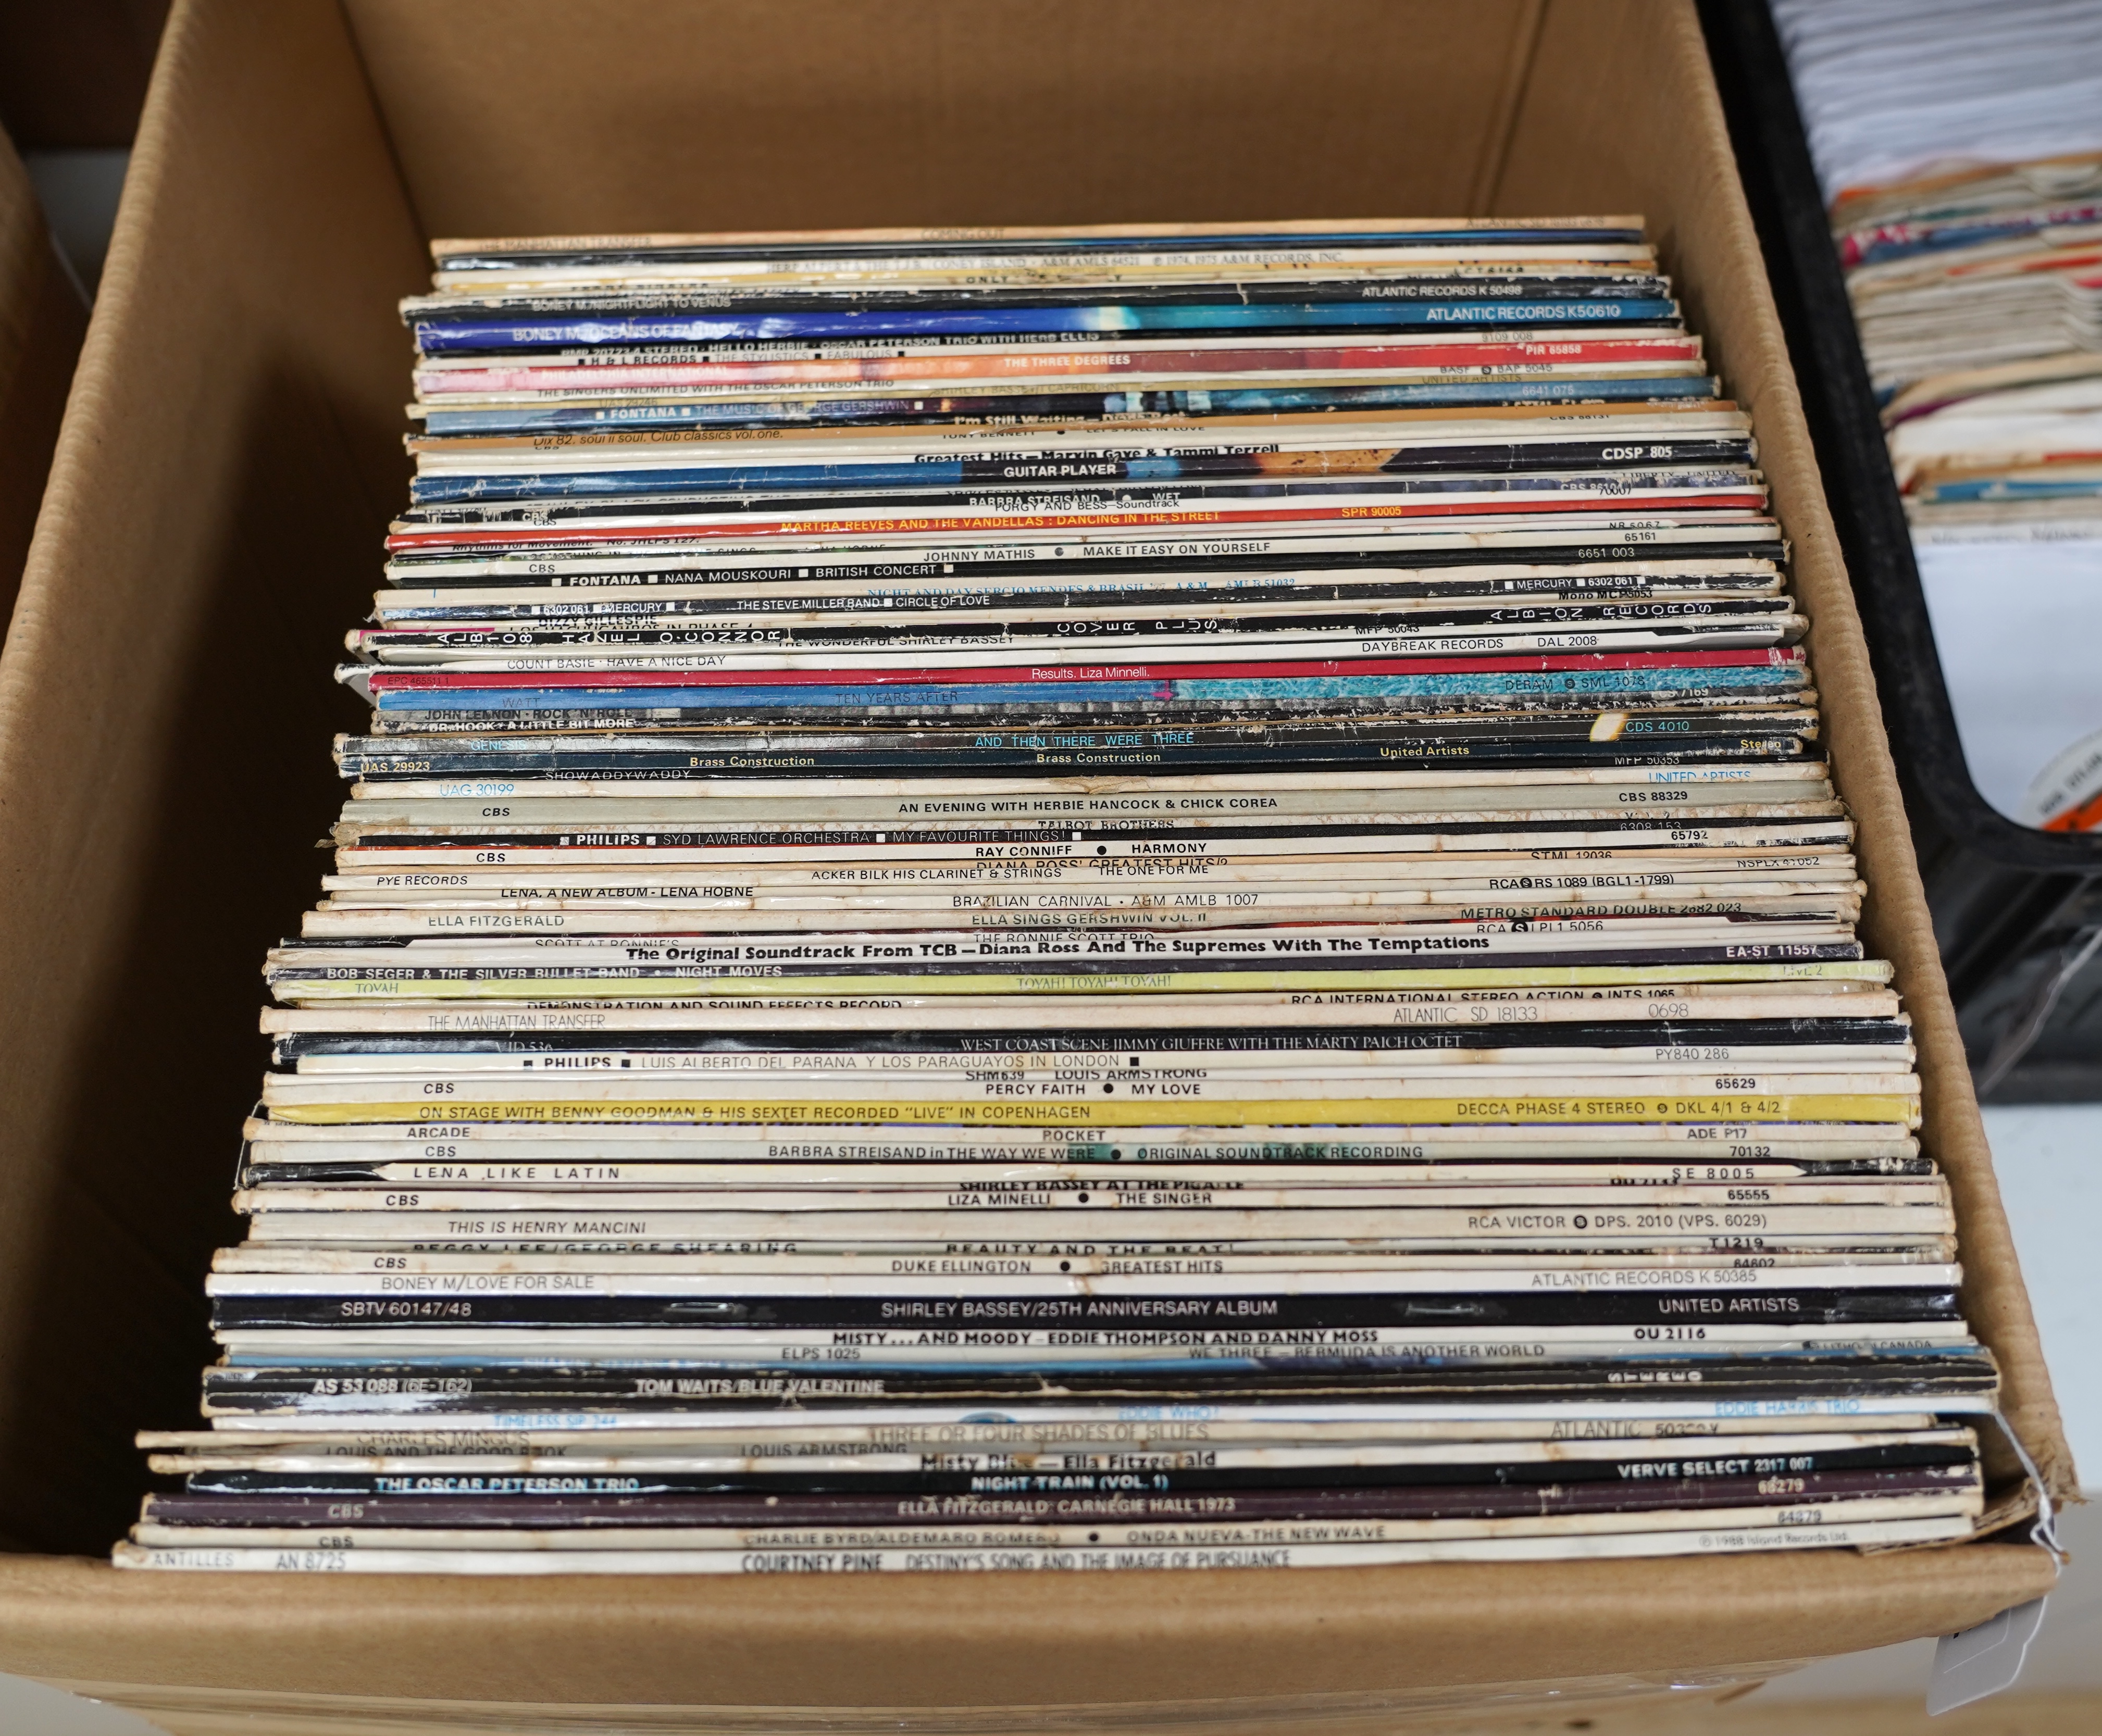 Eighty-two LP record albums including a number of jazz albums, artists include; Courtney Pine, Charlie Mingus, Shirley Bassey, the shadows, Boney M., Charlie Byrd, Oscar Peterson, Diana Ross, Ella Fitzgerald, Steve Mille